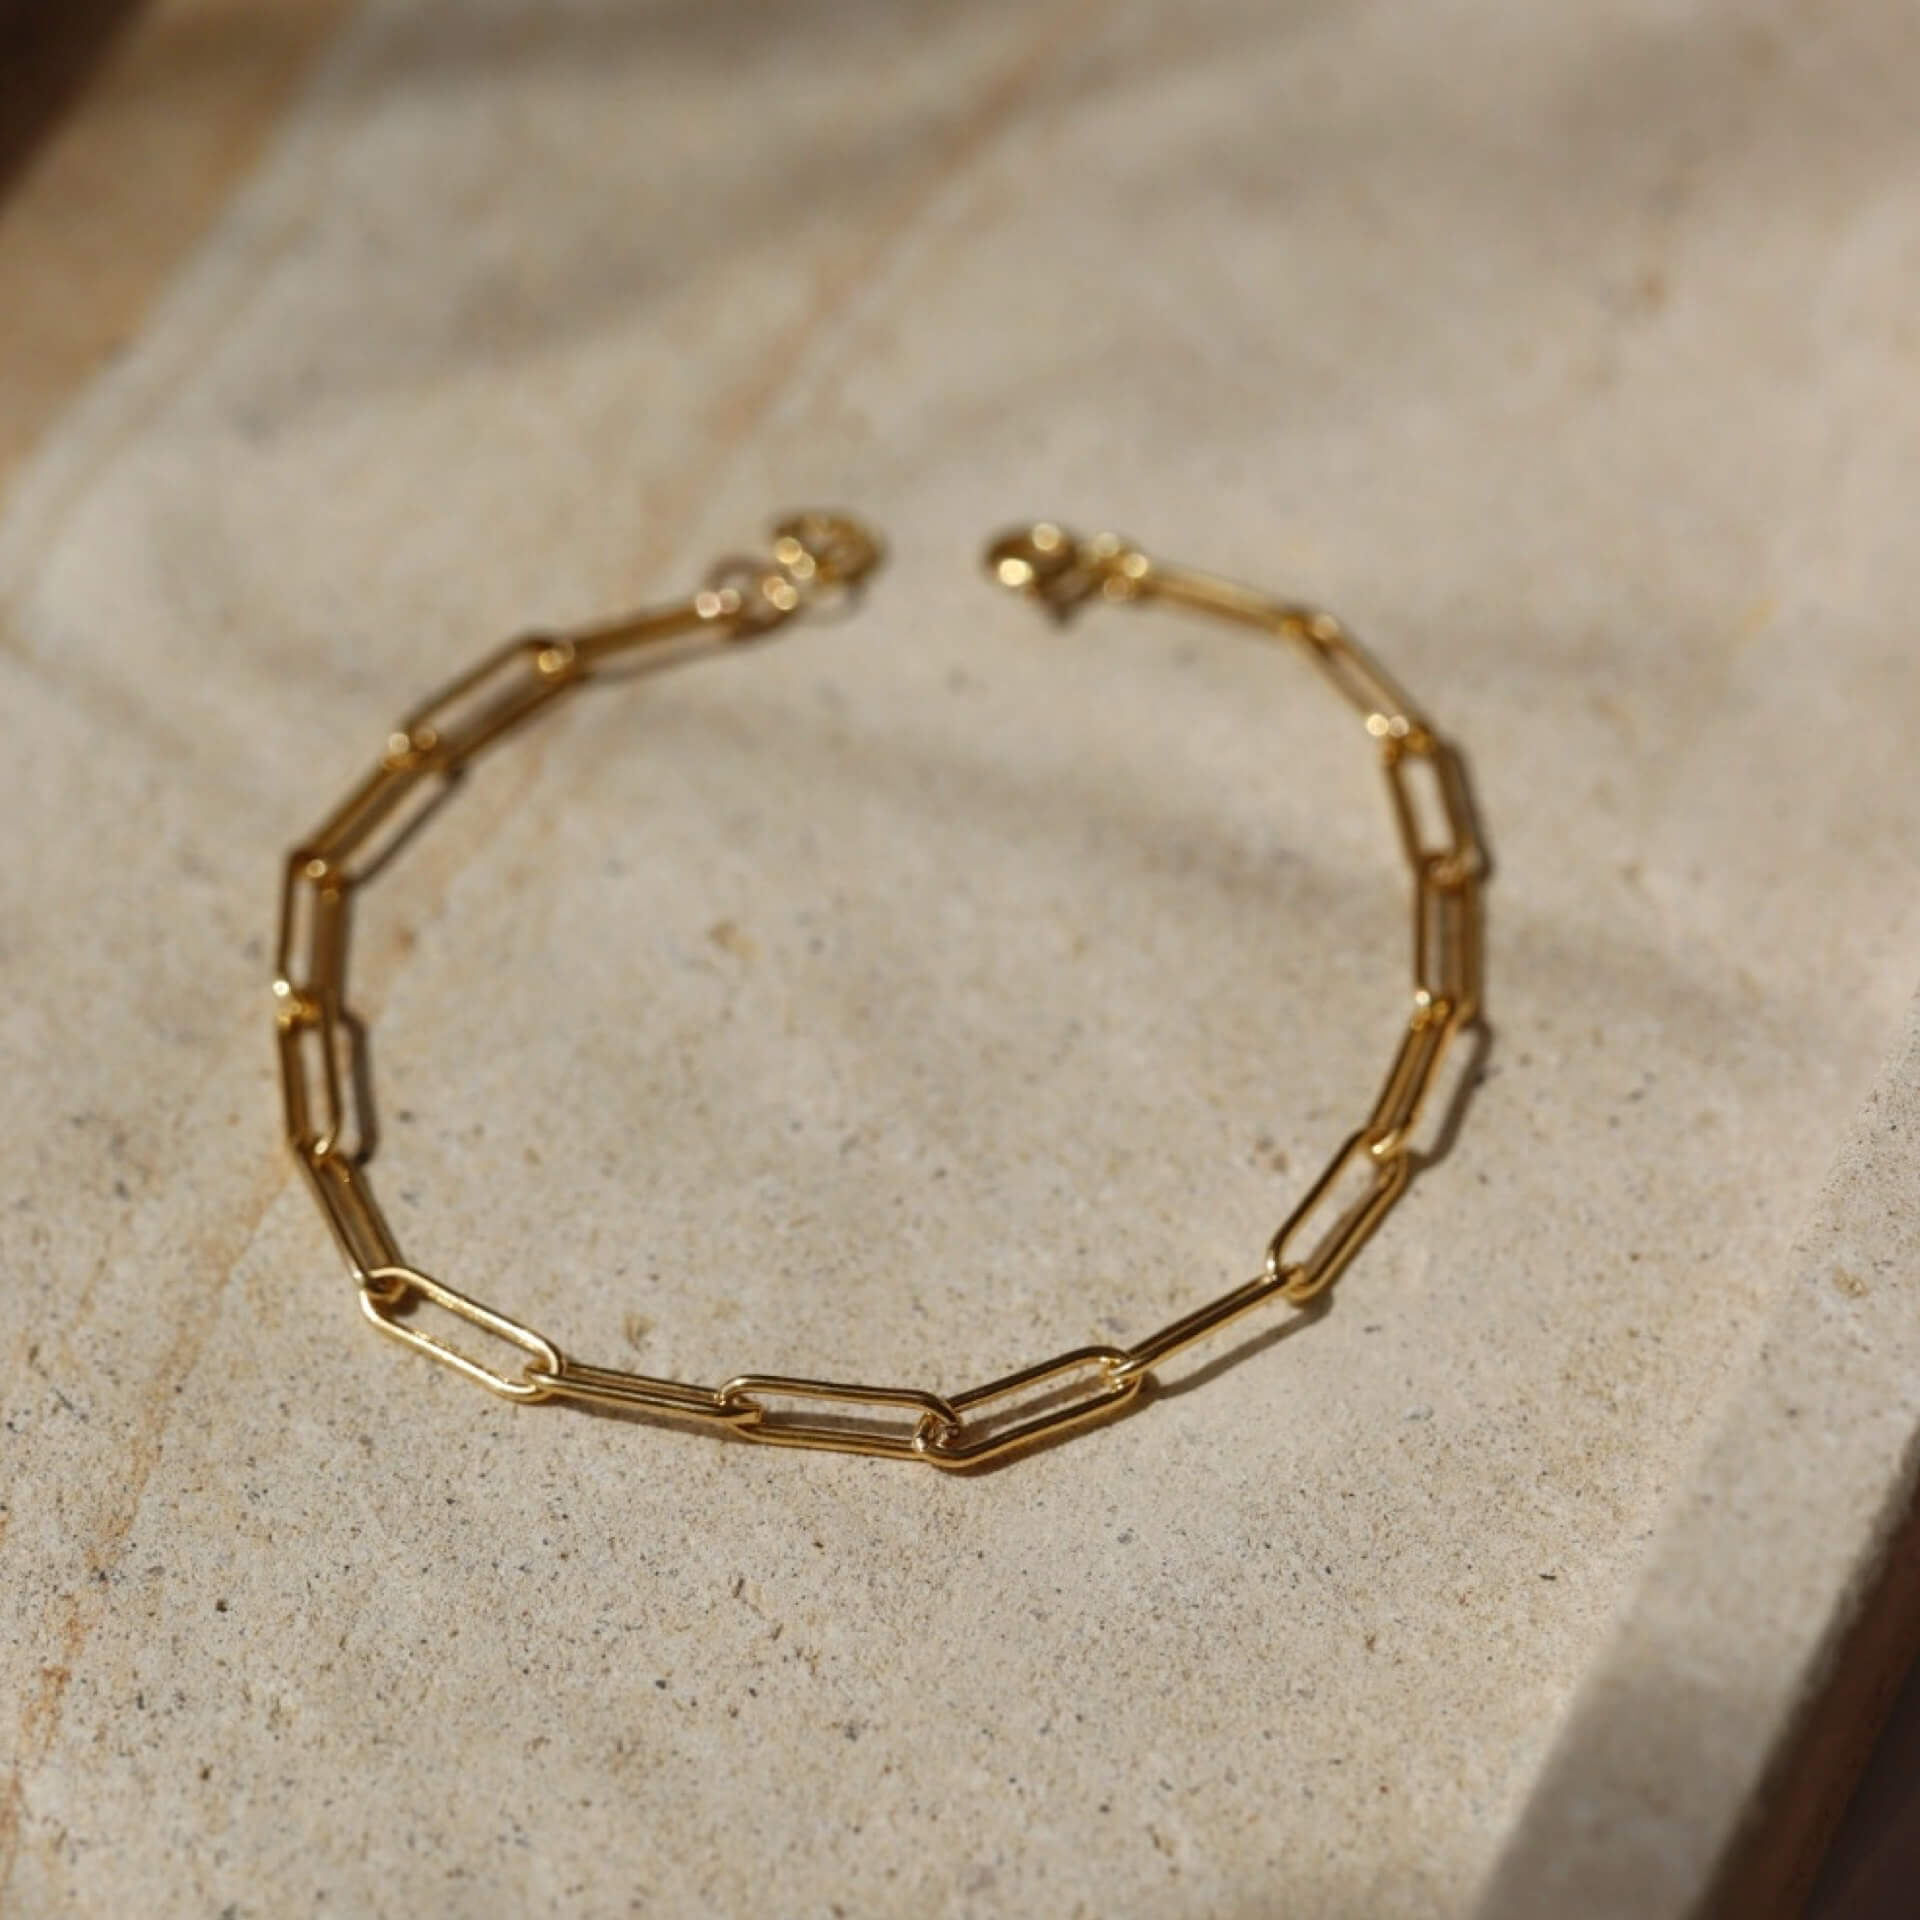 Engraved Initial Paperclip Charm Bracelet - 14K Goldfill